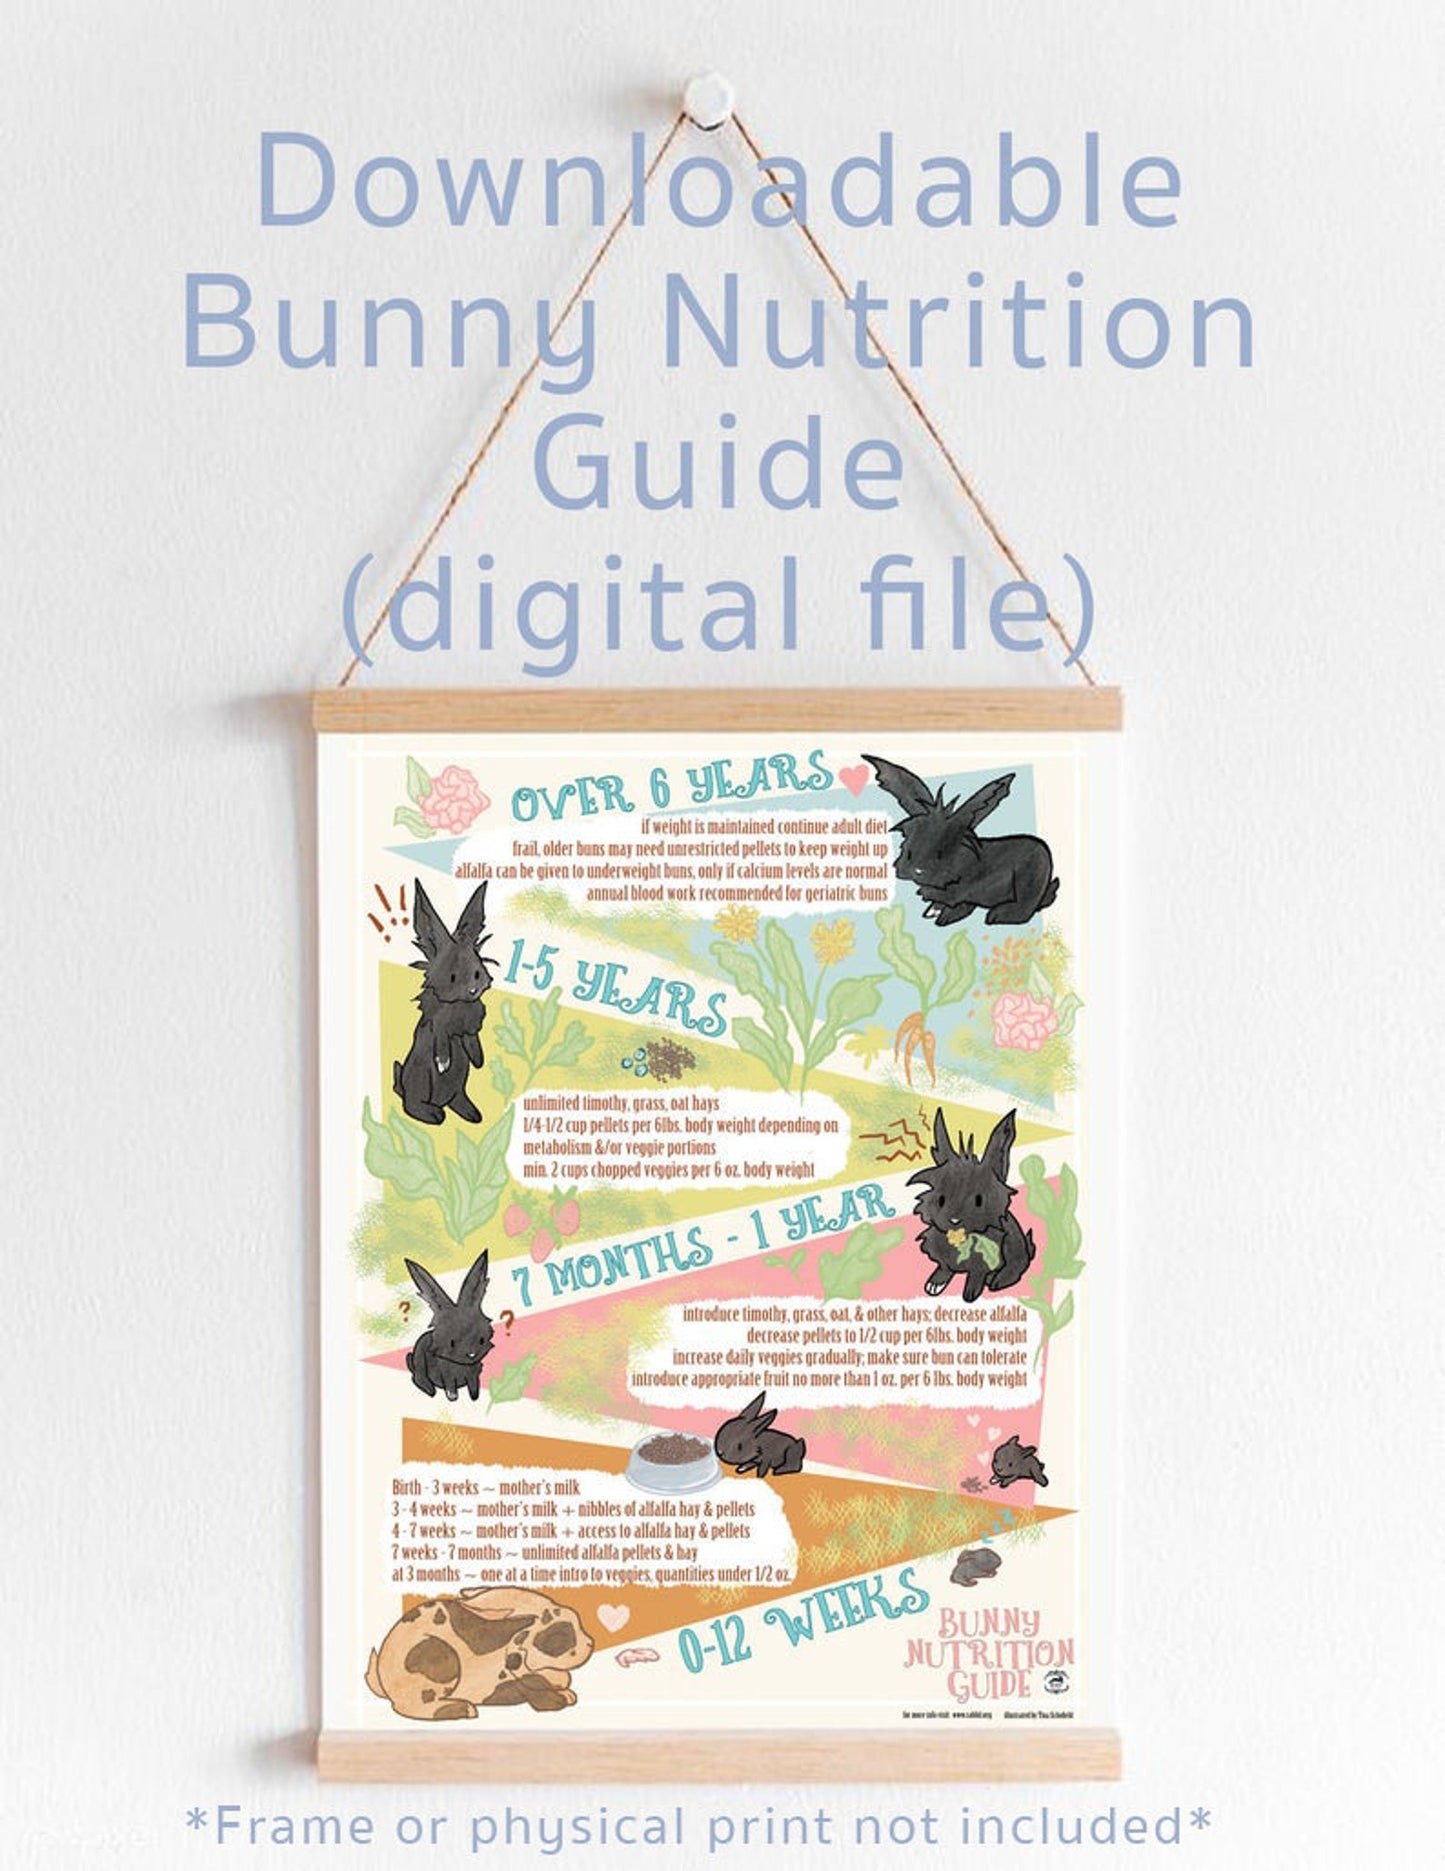 Downloadable Bunny Nutrition Guide - by Tina Schofield